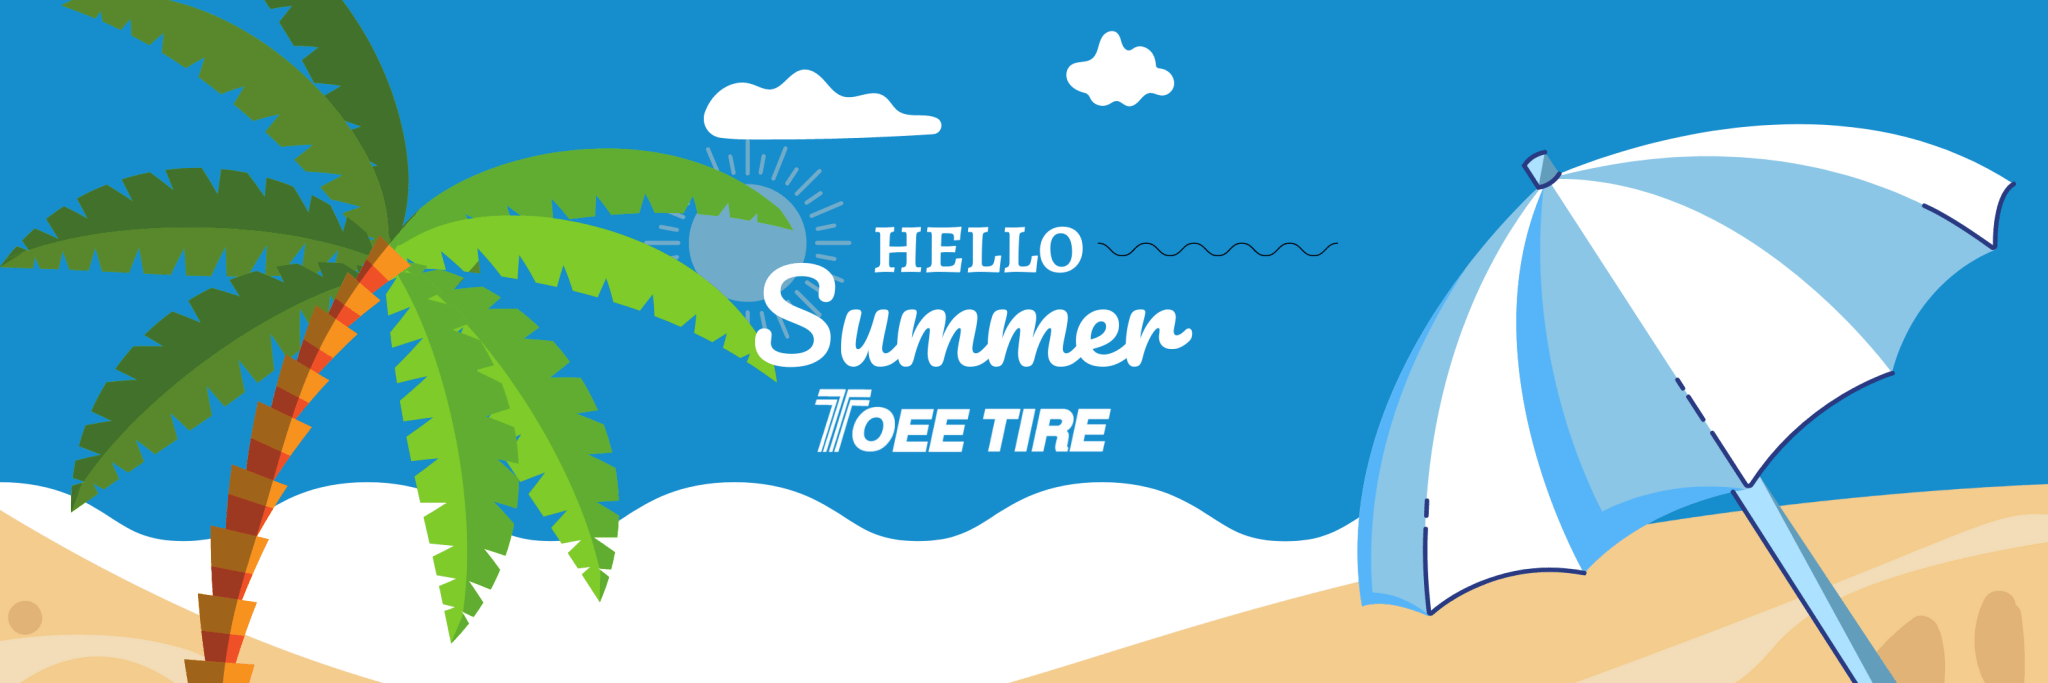 Summer is Here and the Road is Calling! - Toee Tire